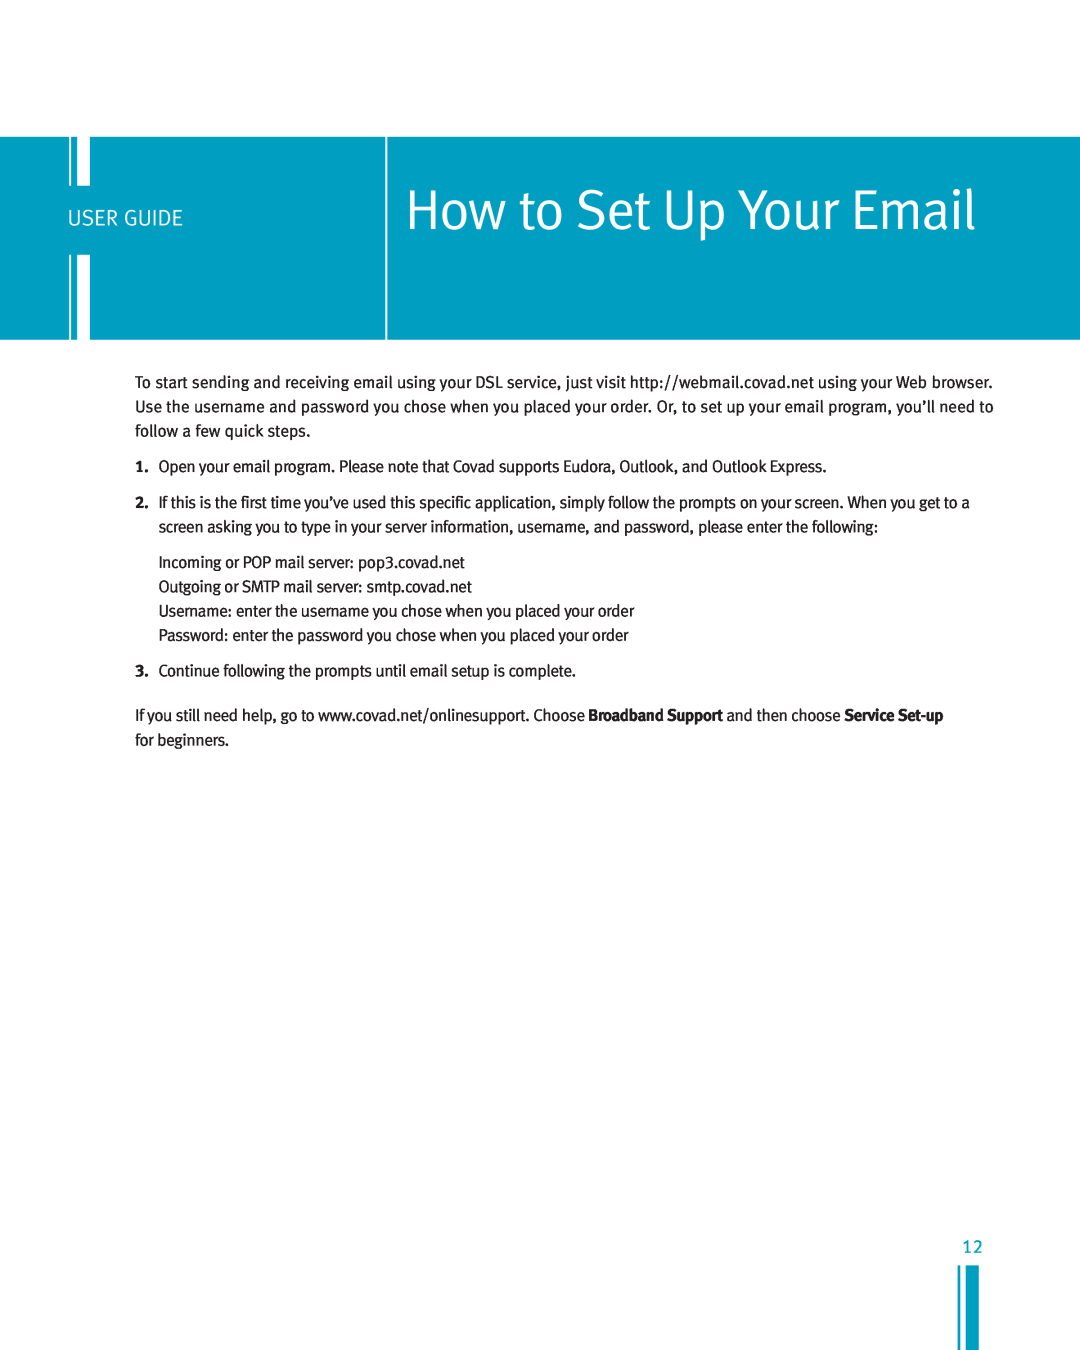 Netopia Network Adapte manual How to Set Up Your Email, User Guide 